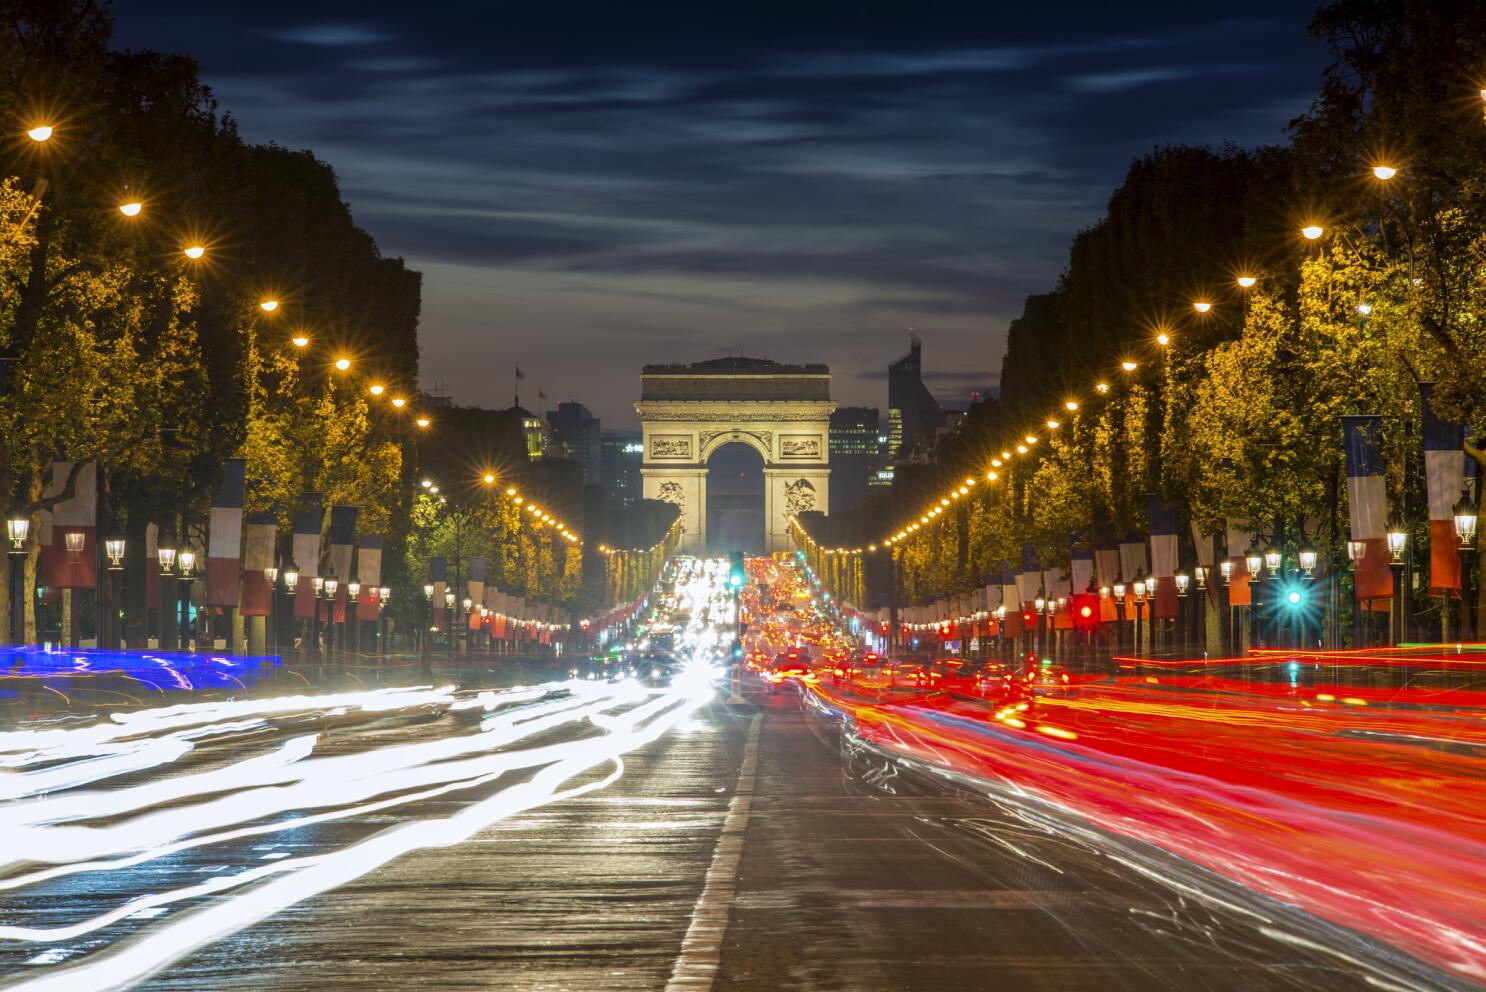 Avenue des Champs-Elysees at night, Paris, France, Europe stock photo